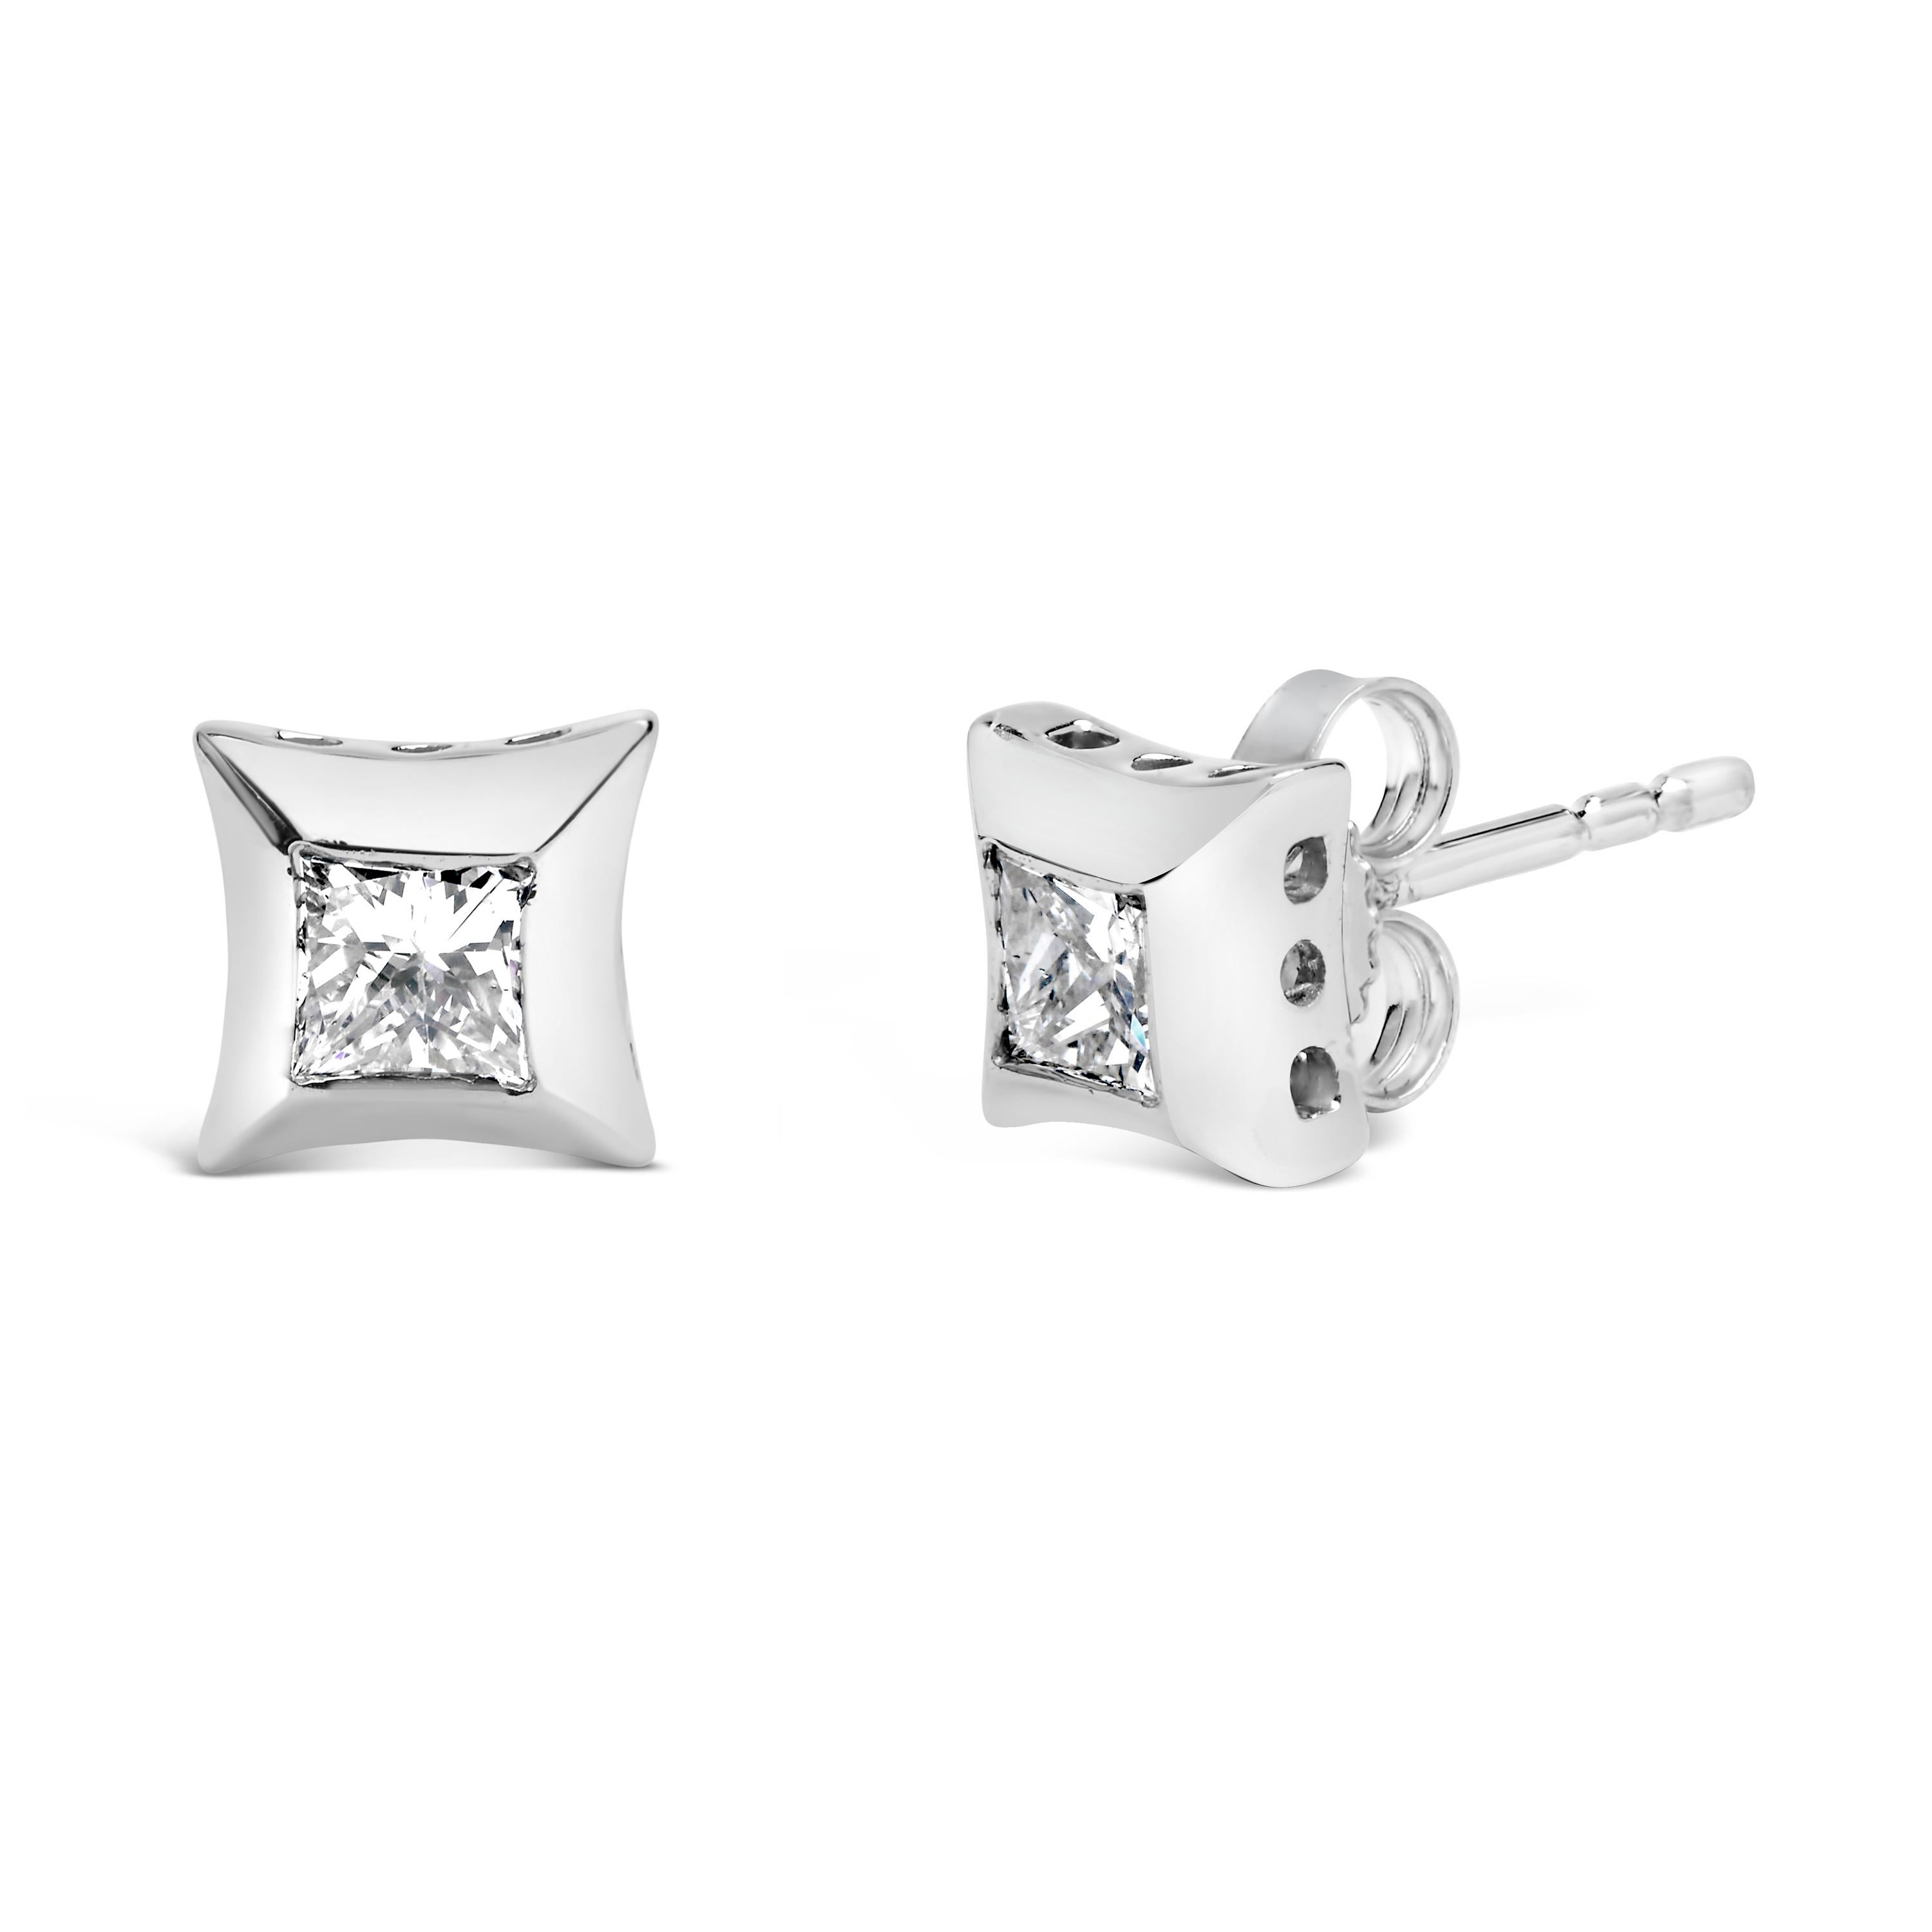 Introducing a dazzling masterpiece crafted to perfection, these 10K White Gold Solitaire Stud Earrings are an exquisite addition to any jewelry collection. With a total diamond weight of 1/2 cttw, the two princess-cut diamonds shimmer brilliantly,